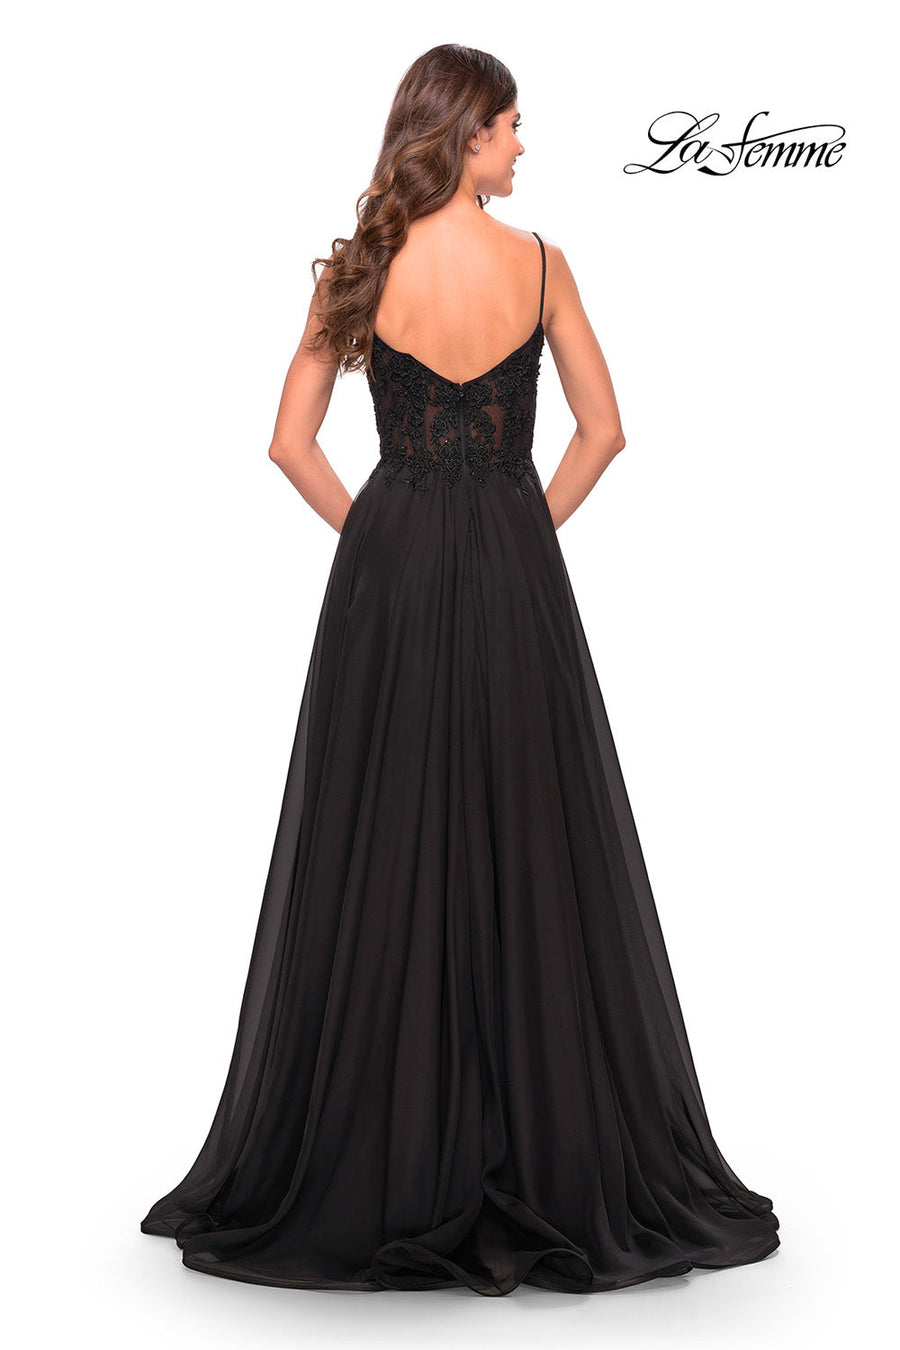 La Femme 30639 prom dress images.  La Femme 30639 is available in these colors: Black, Dark Emerald.